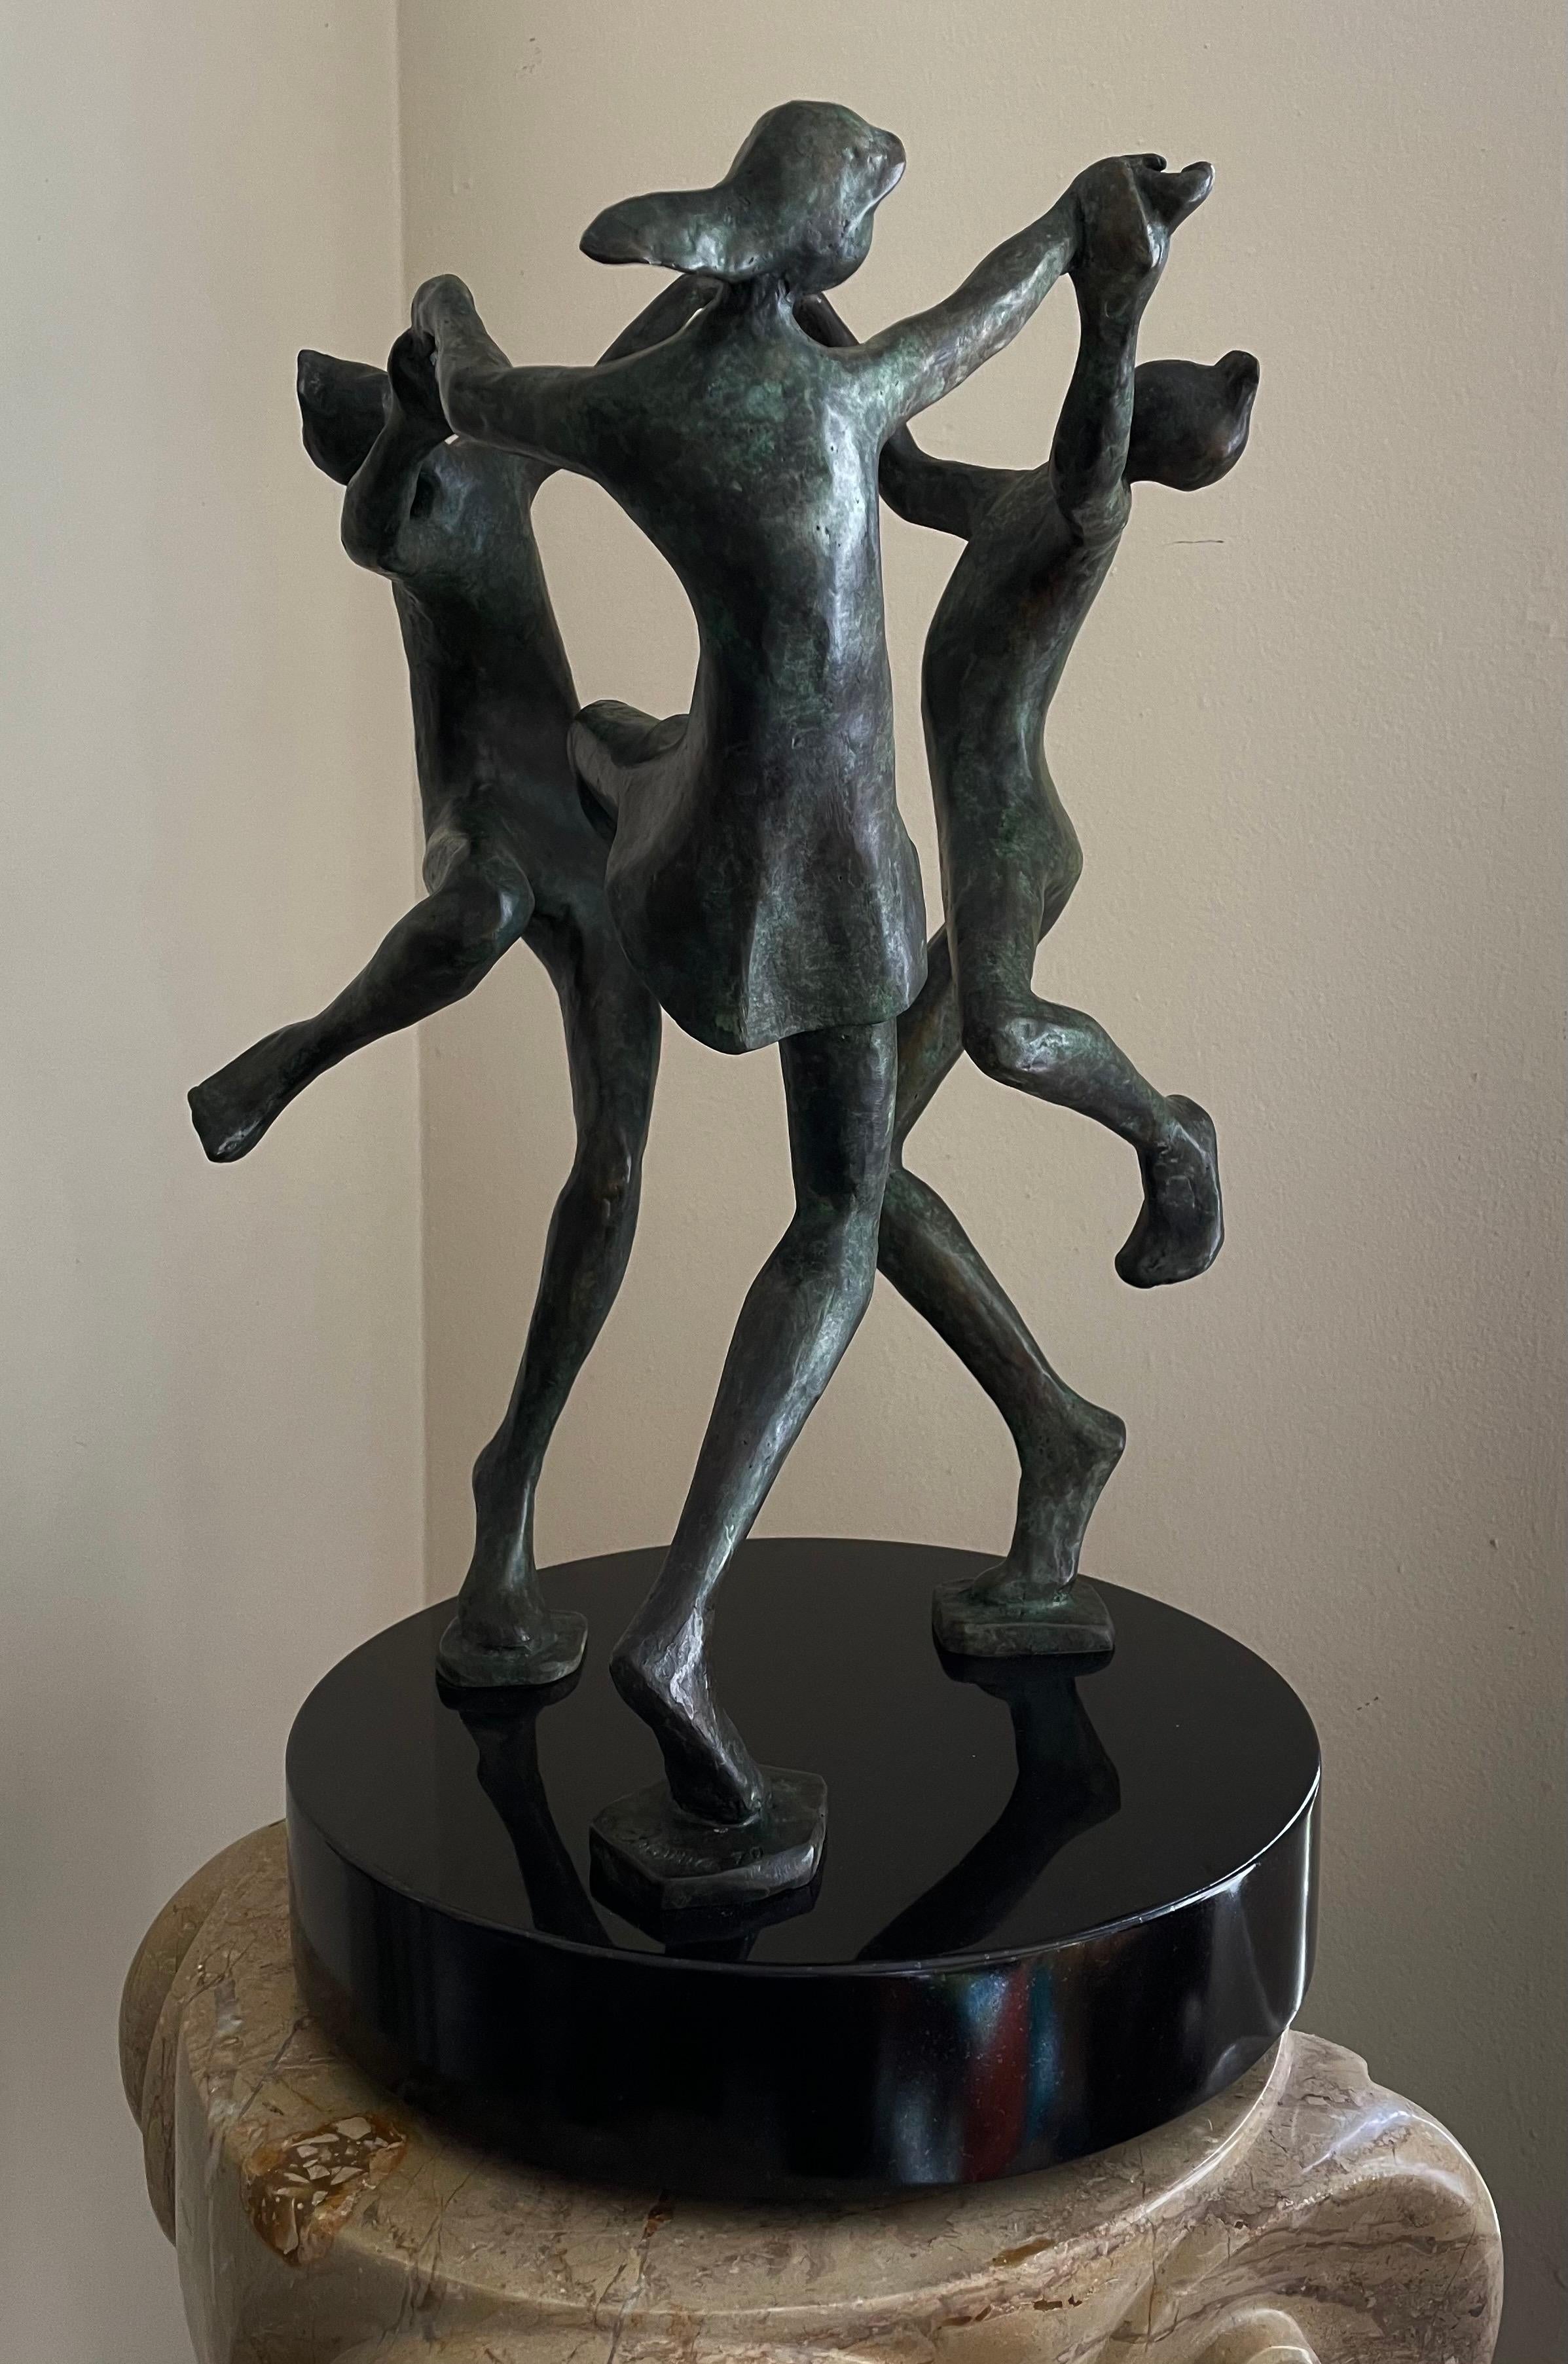  THE DANCE OF JOY - Gold Figurative Sculpture by Charna Rickey